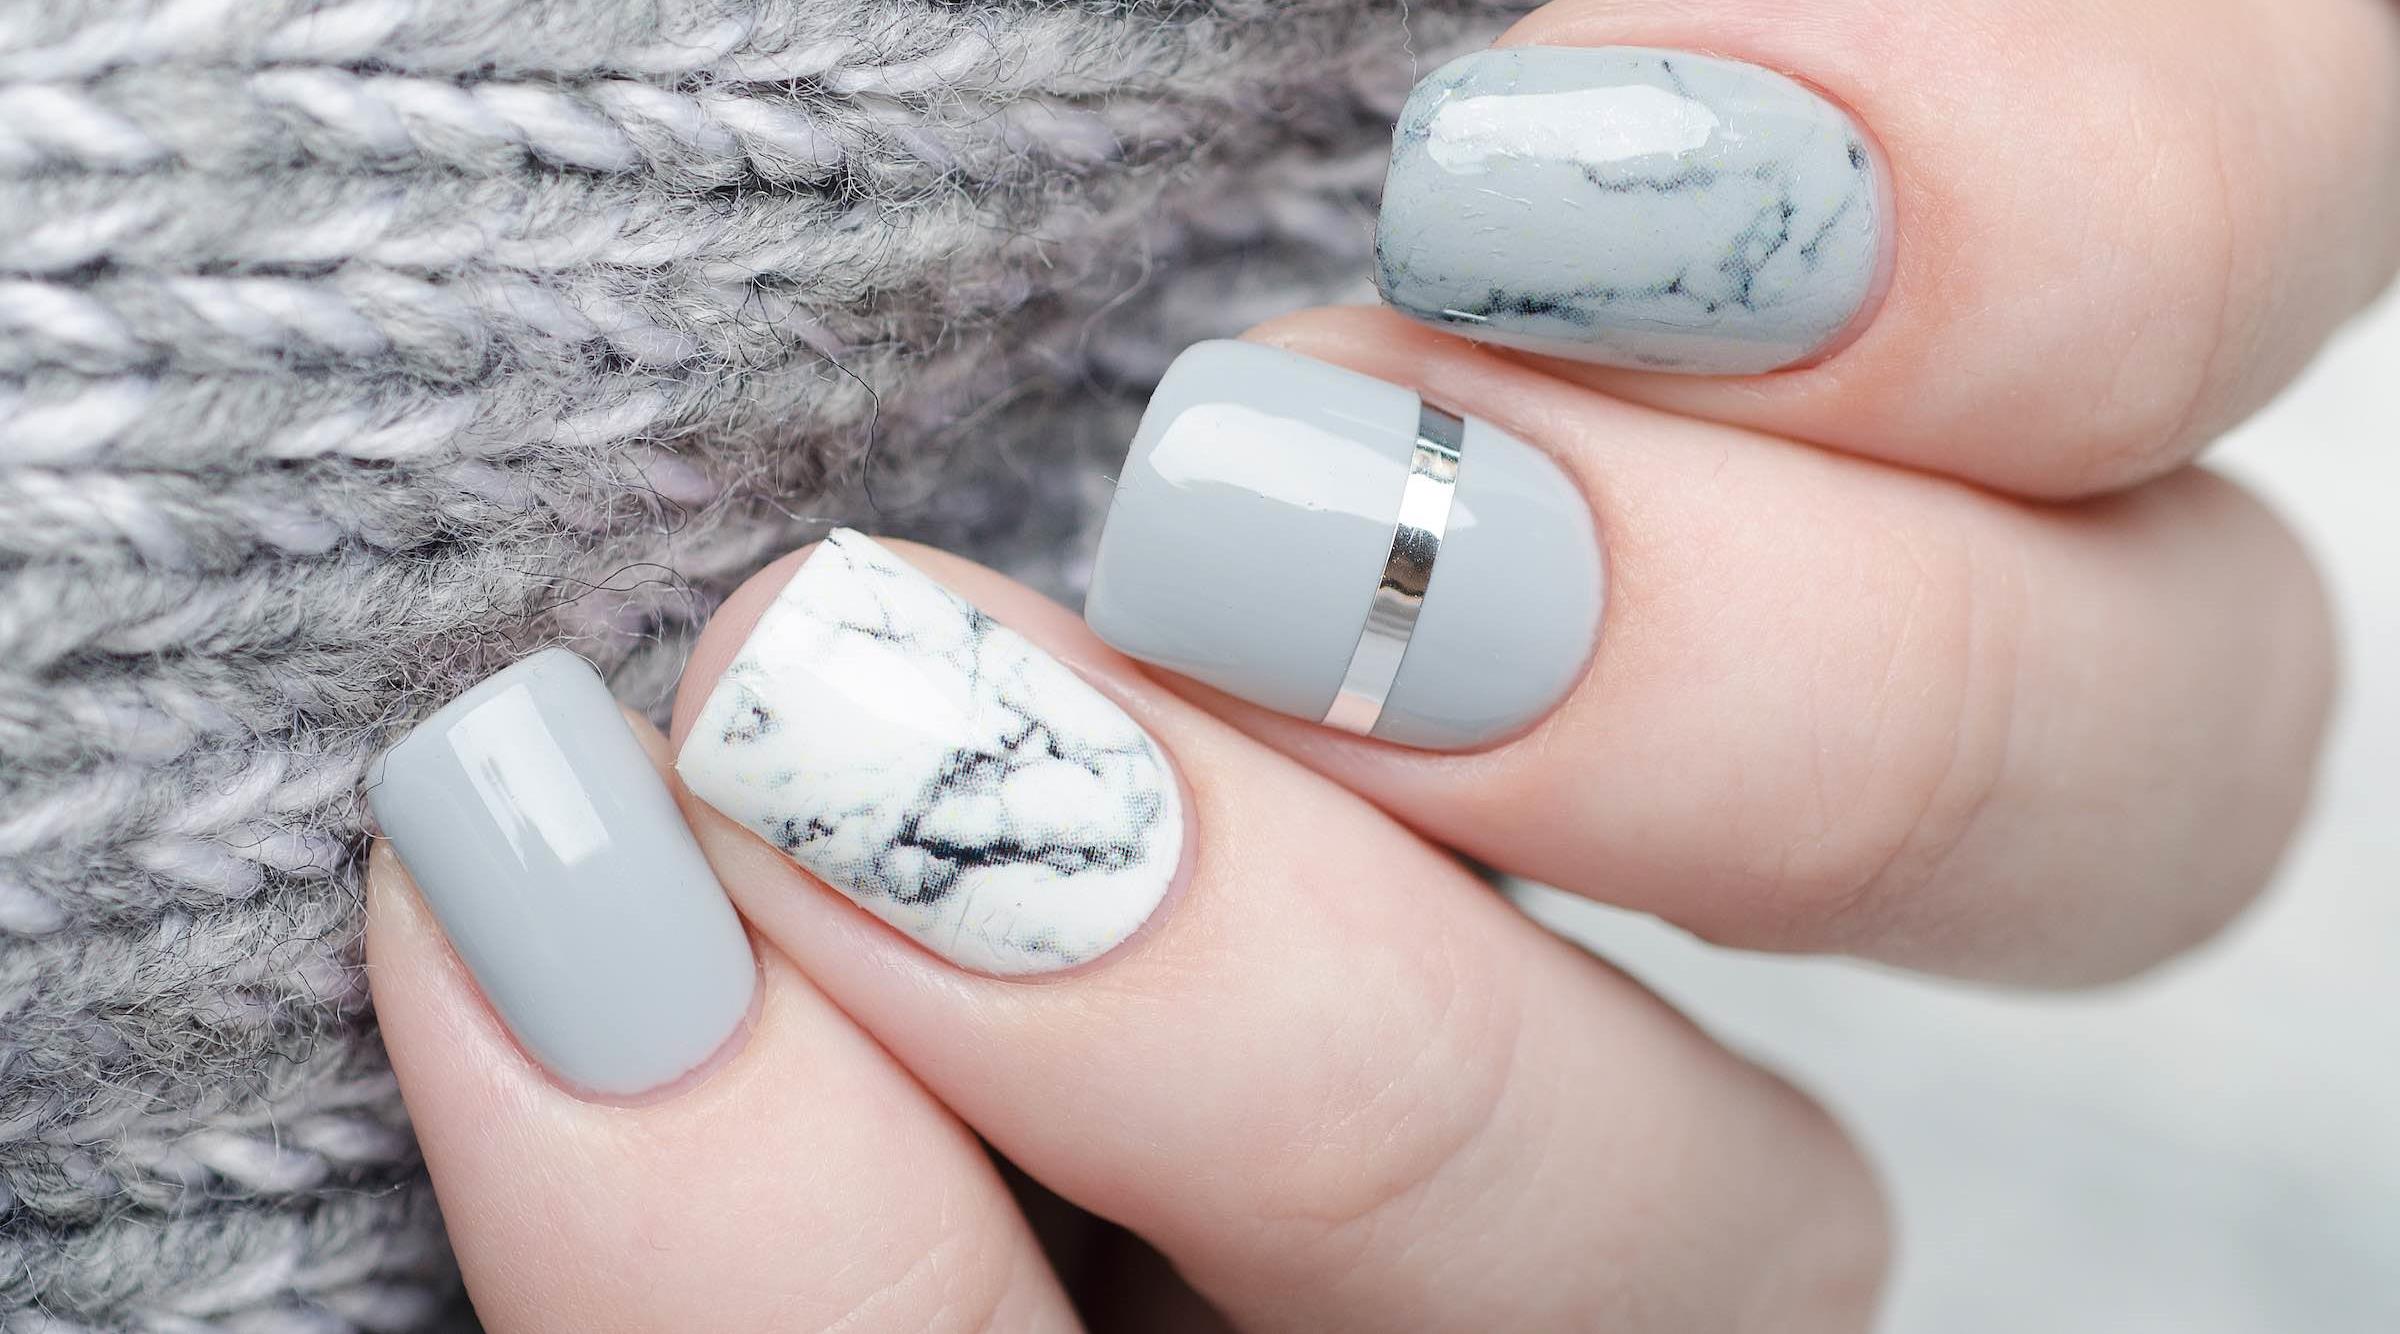 6. "Cool and Unique Christmas Nail Art Inspiration for the Perfect Holiday Manicure" - wide 1